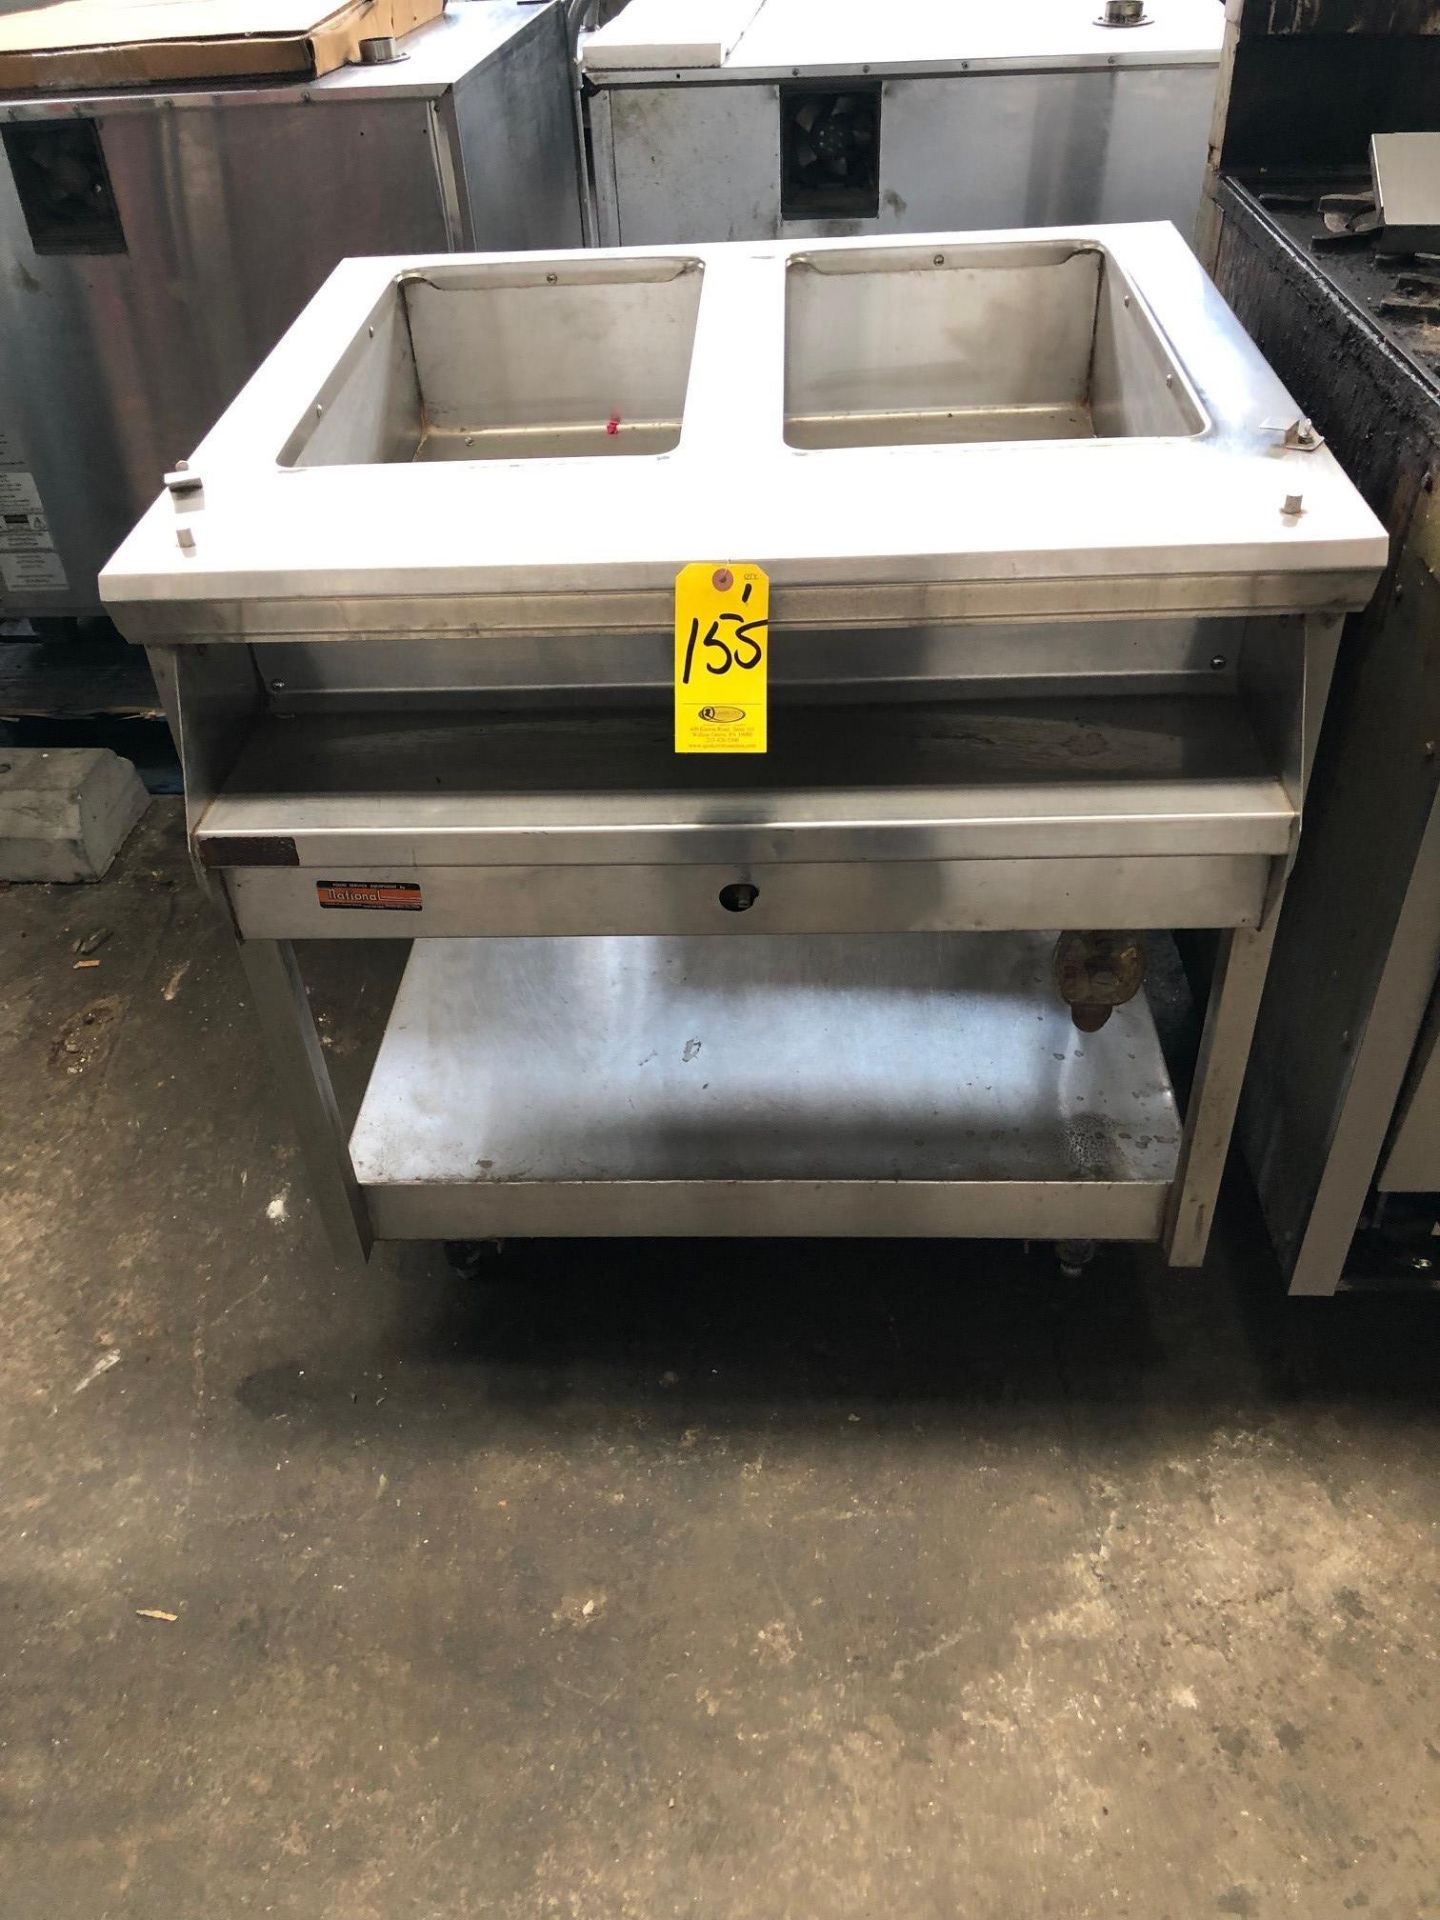 2-WELL SS GAS STEAM TABLE (Located - Phila., PA)